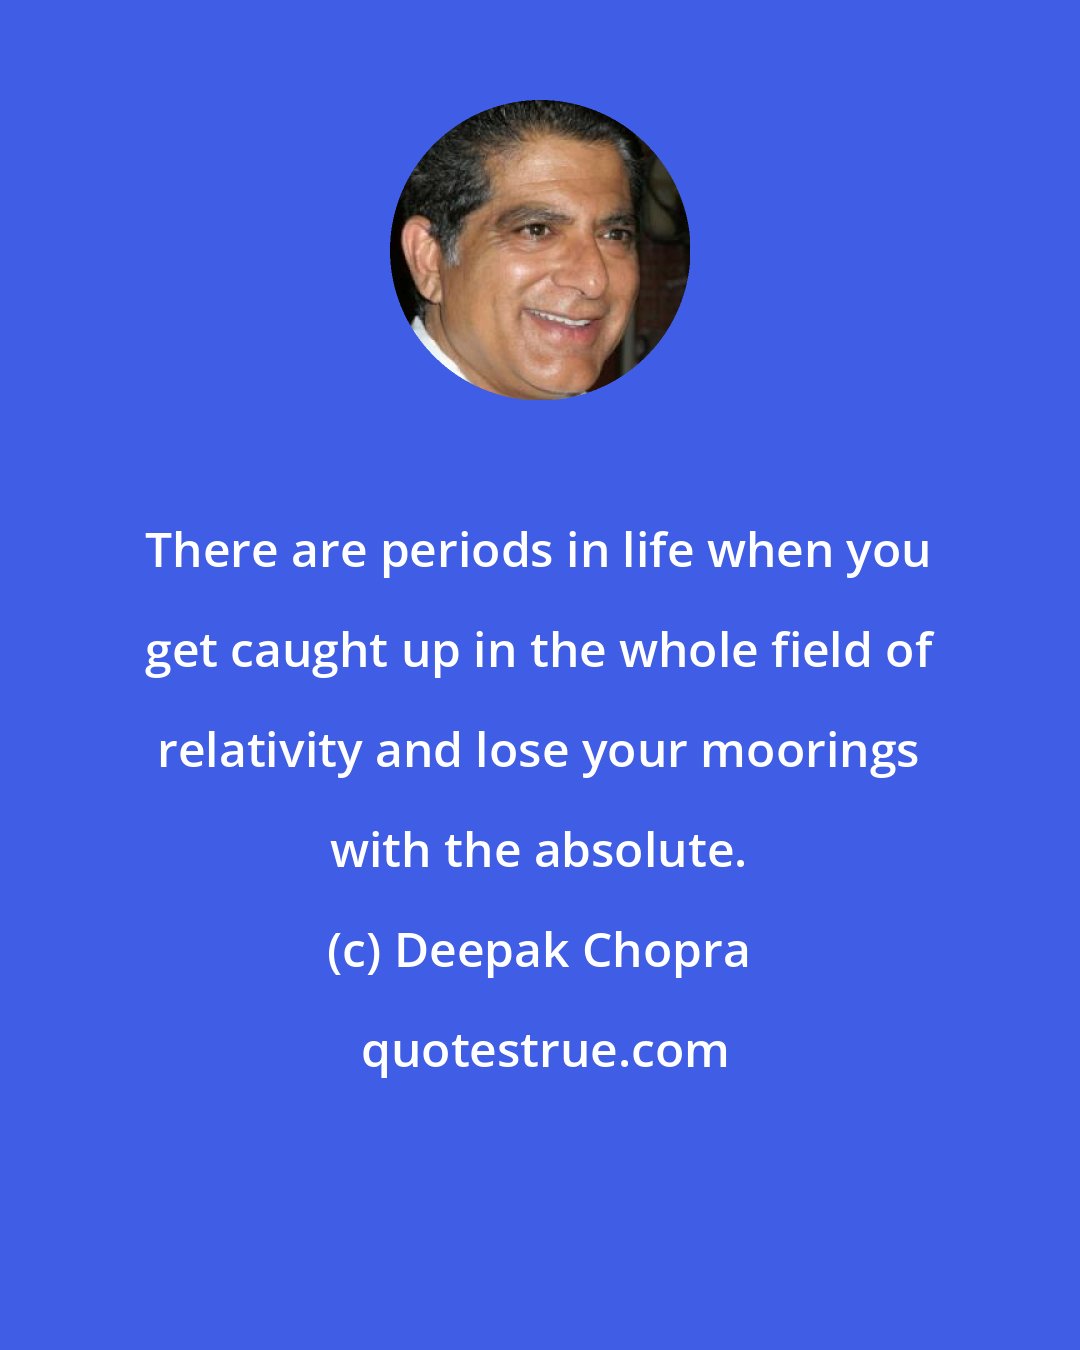 Deepak Chopra: There are periods in life when you get caught up in the whole field of relativity and lose your moorings with the absolute.